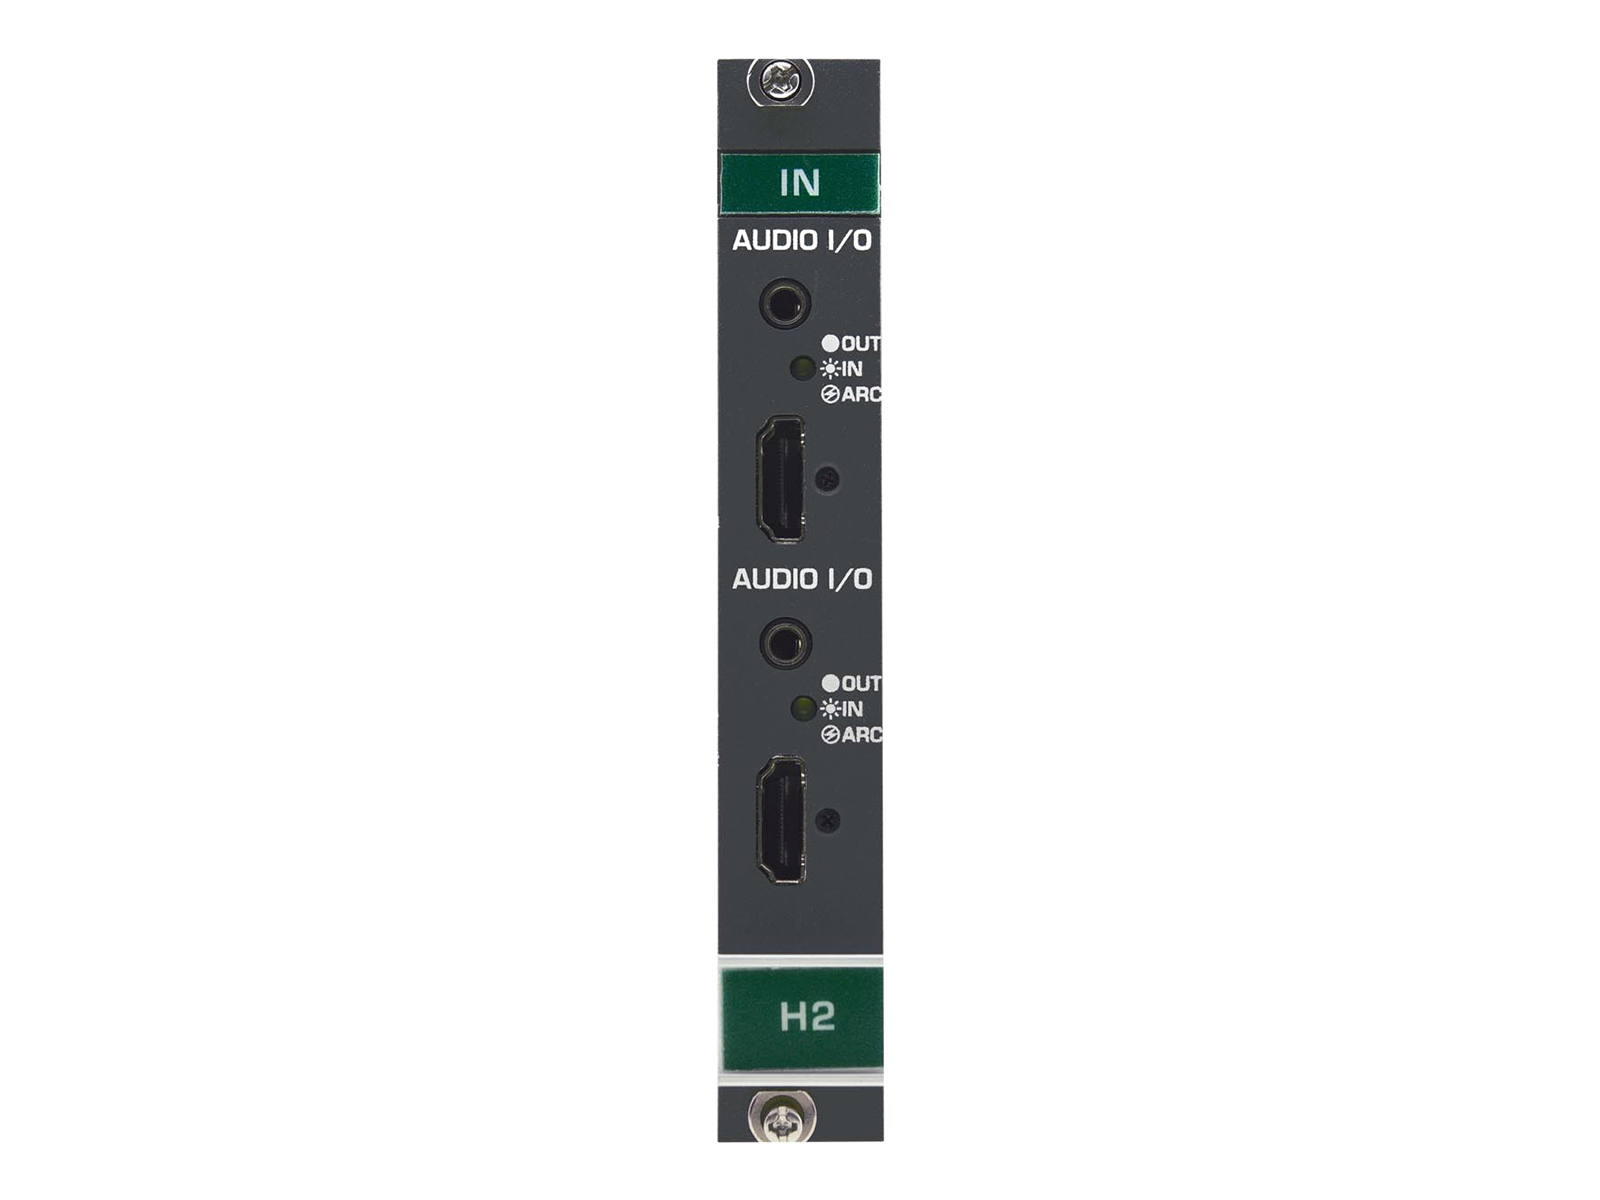 H2A-IN2-F34 2-Channel 4K HDR HDMI Input Card with Analog Audio by Kramer